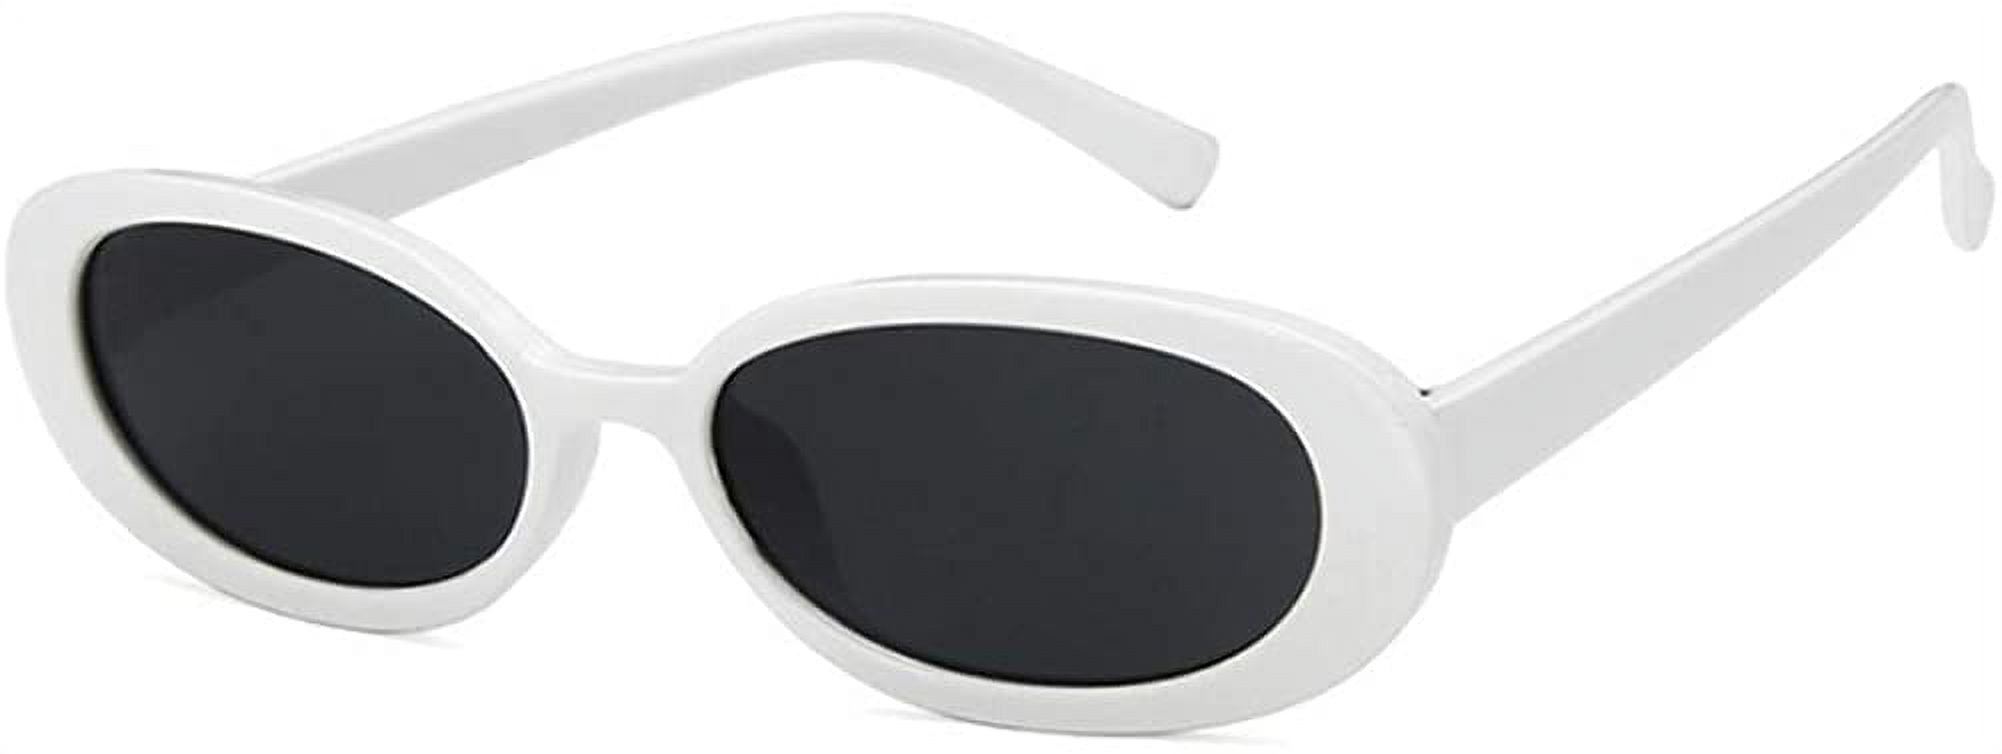 Retro Oval Sunglasses for Women and Men Vintage Sunnies Clout Goggles 90s  Style - White 